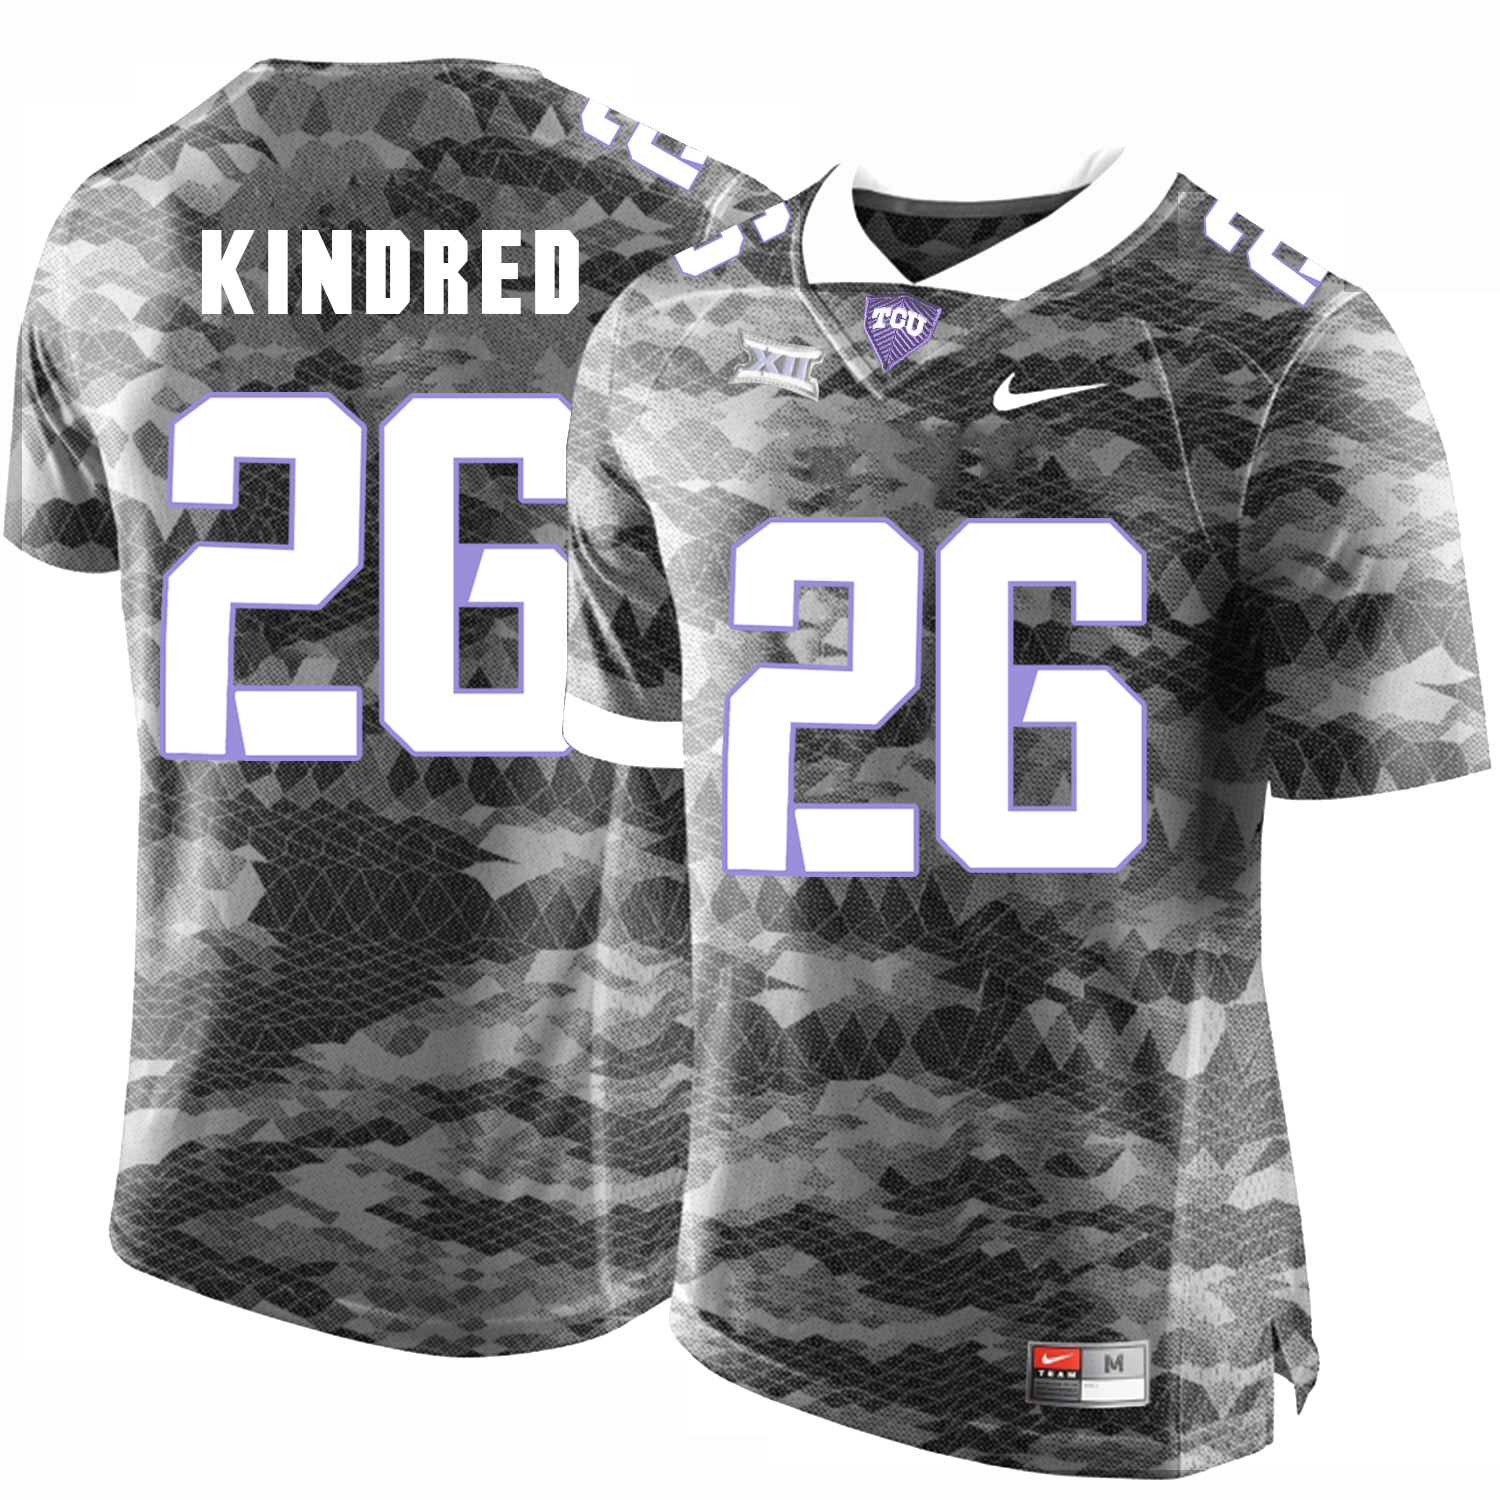 TCU Horned Frogs 26 Derrick Kindred Gray College Football Limited Jersey